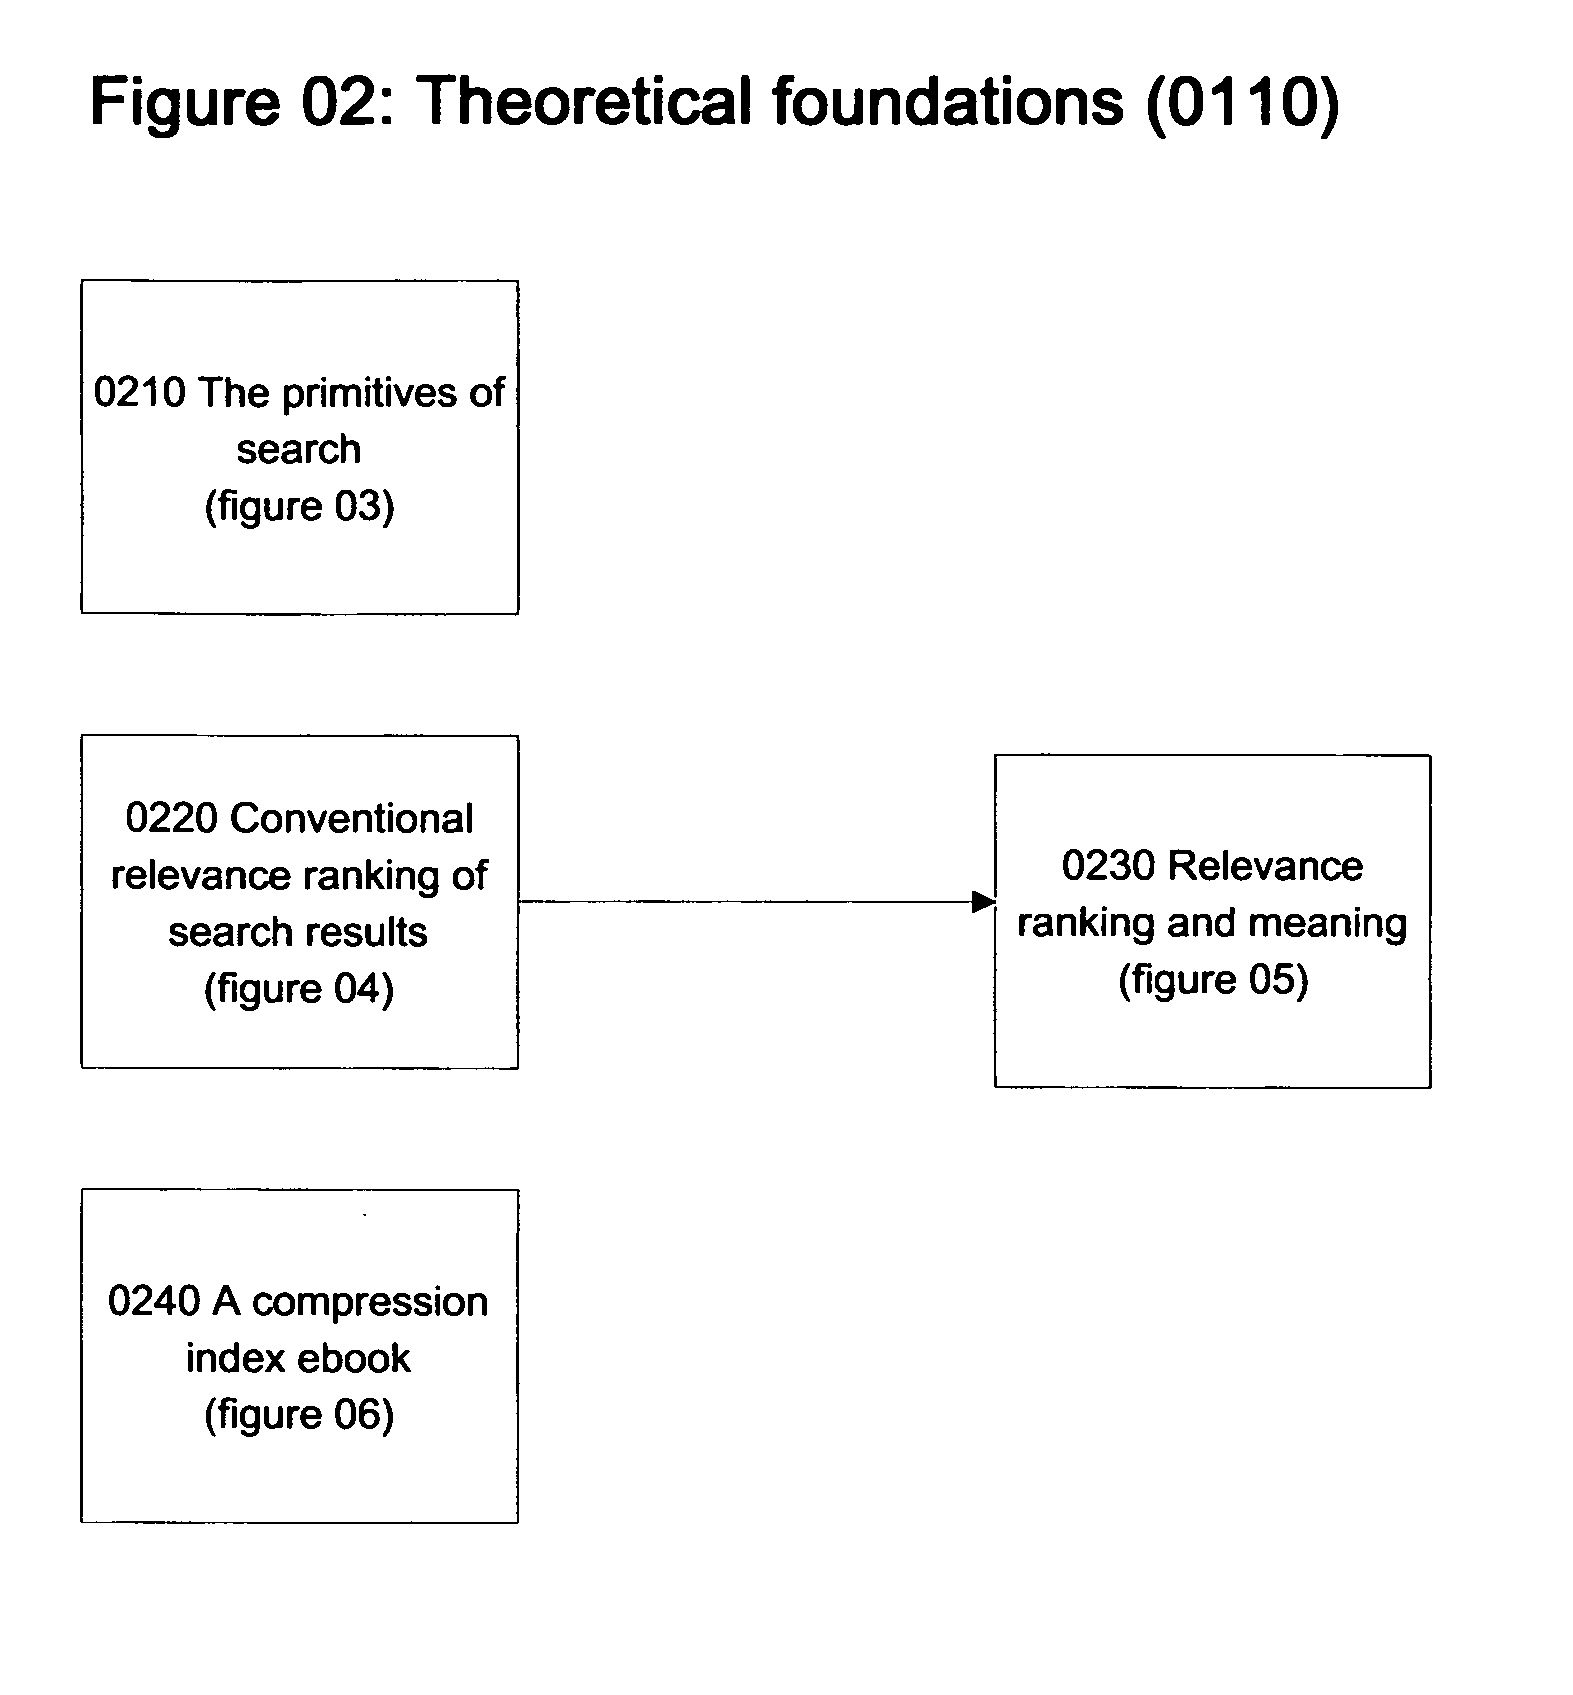 Method and system for compression indexing and efficient proximity search of text data